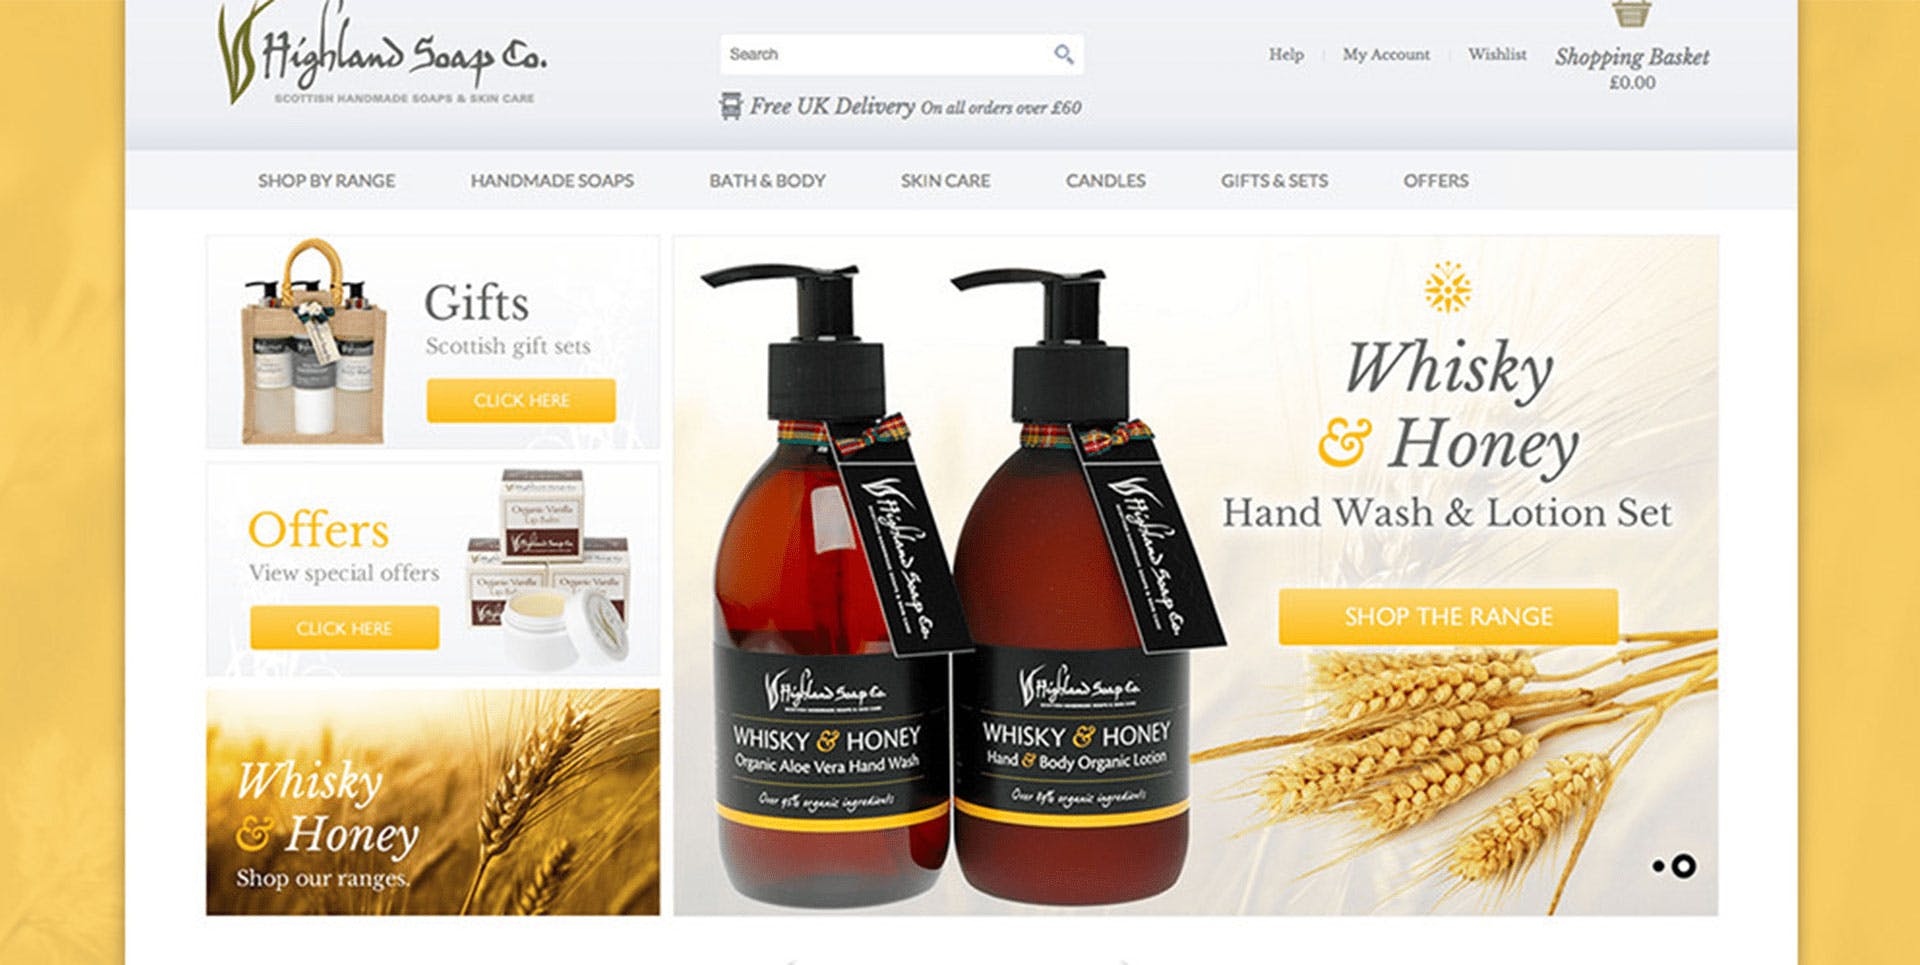 10 Years Of The Highland Soap Co. Website